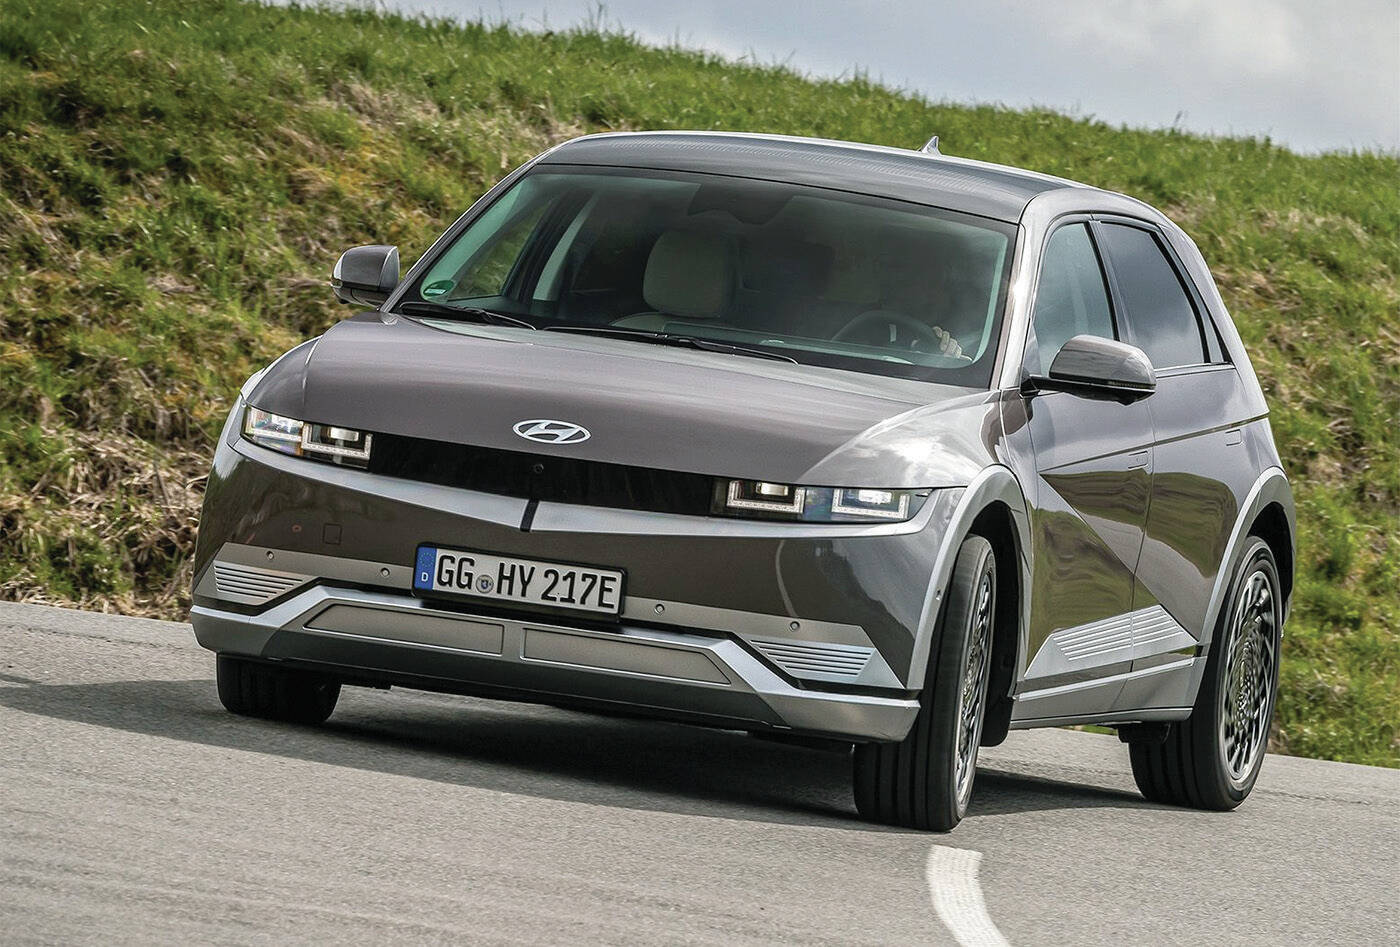 Hyundai will create a performance-oriented version of the Ioniq 5 electric vehicle, called the N. The Sleuth expects it will get the 576-horsepower system from the related Kia EV6 GT.